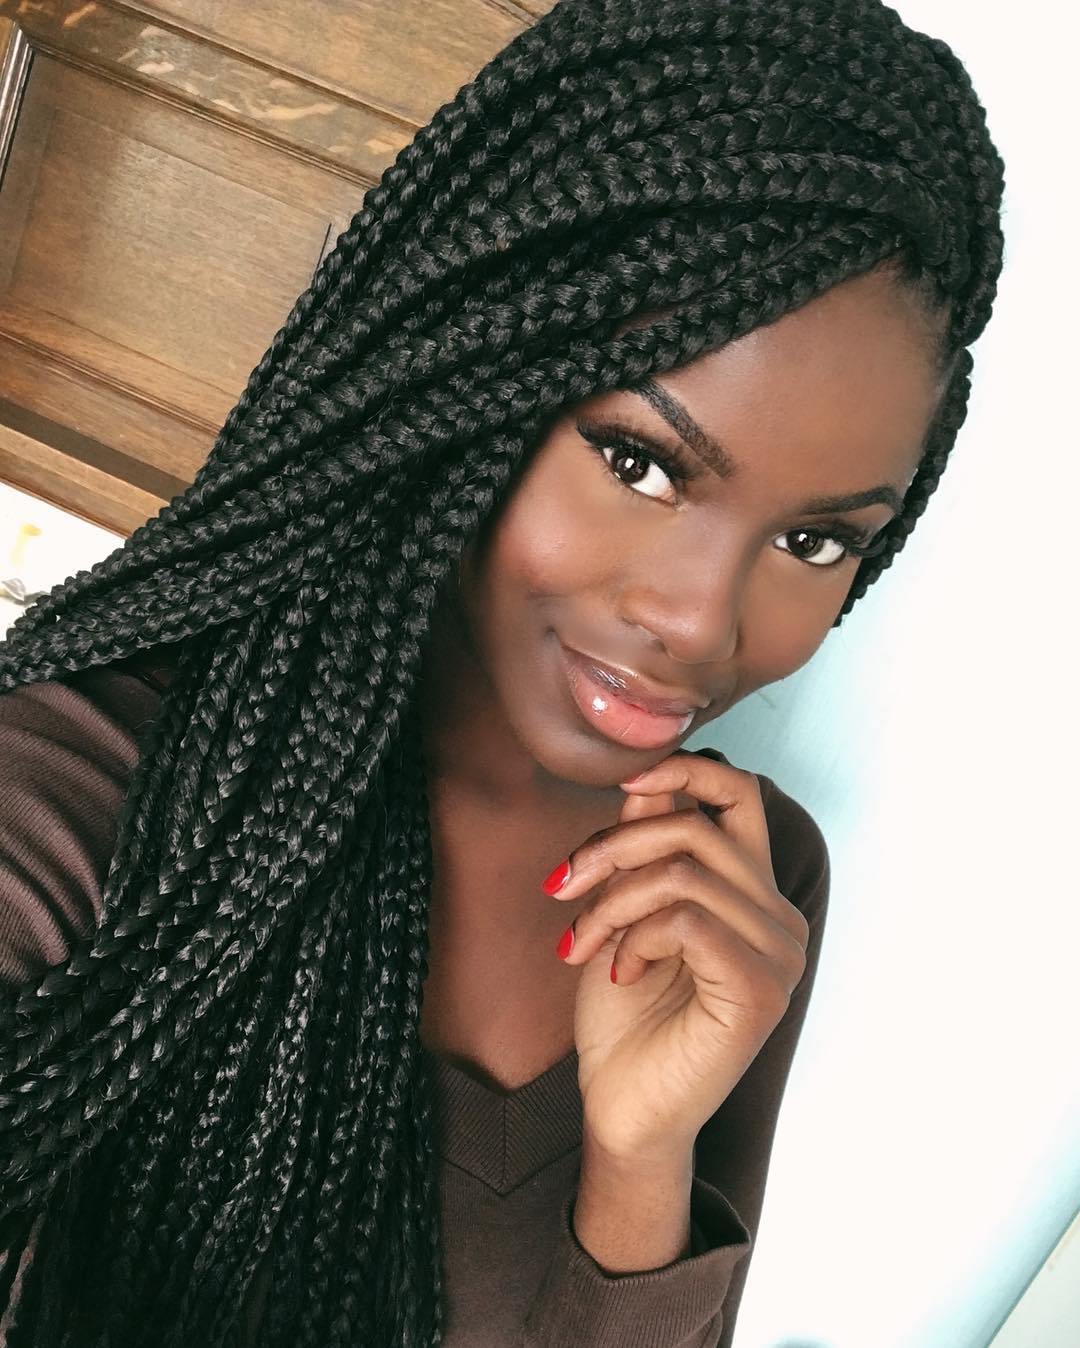 Box braids most definitely b/c cornrows are attached to your head and as so...